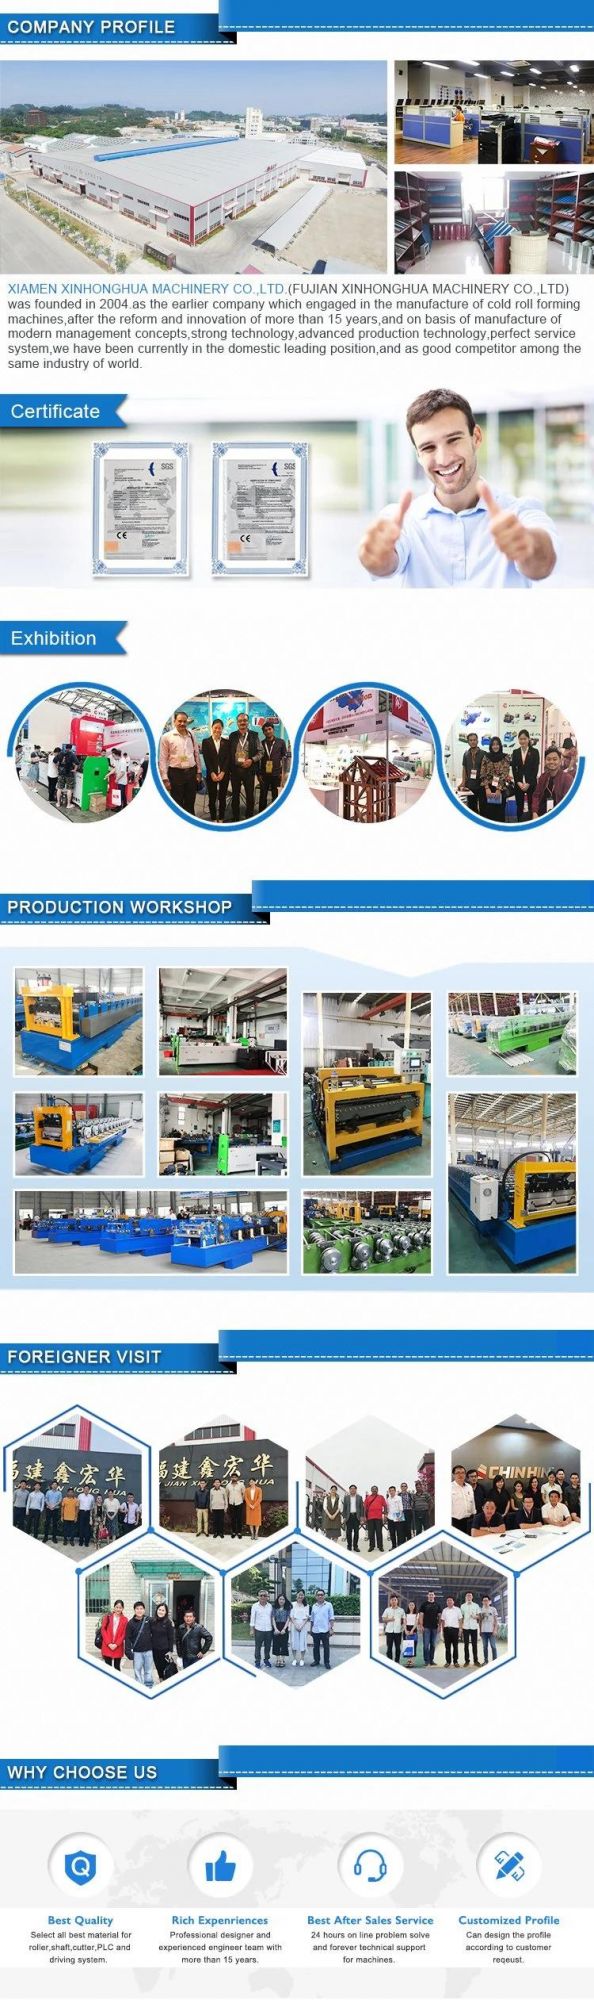 Automatic Standing Seam Building Material Roll Tile Roofing Forming Machine